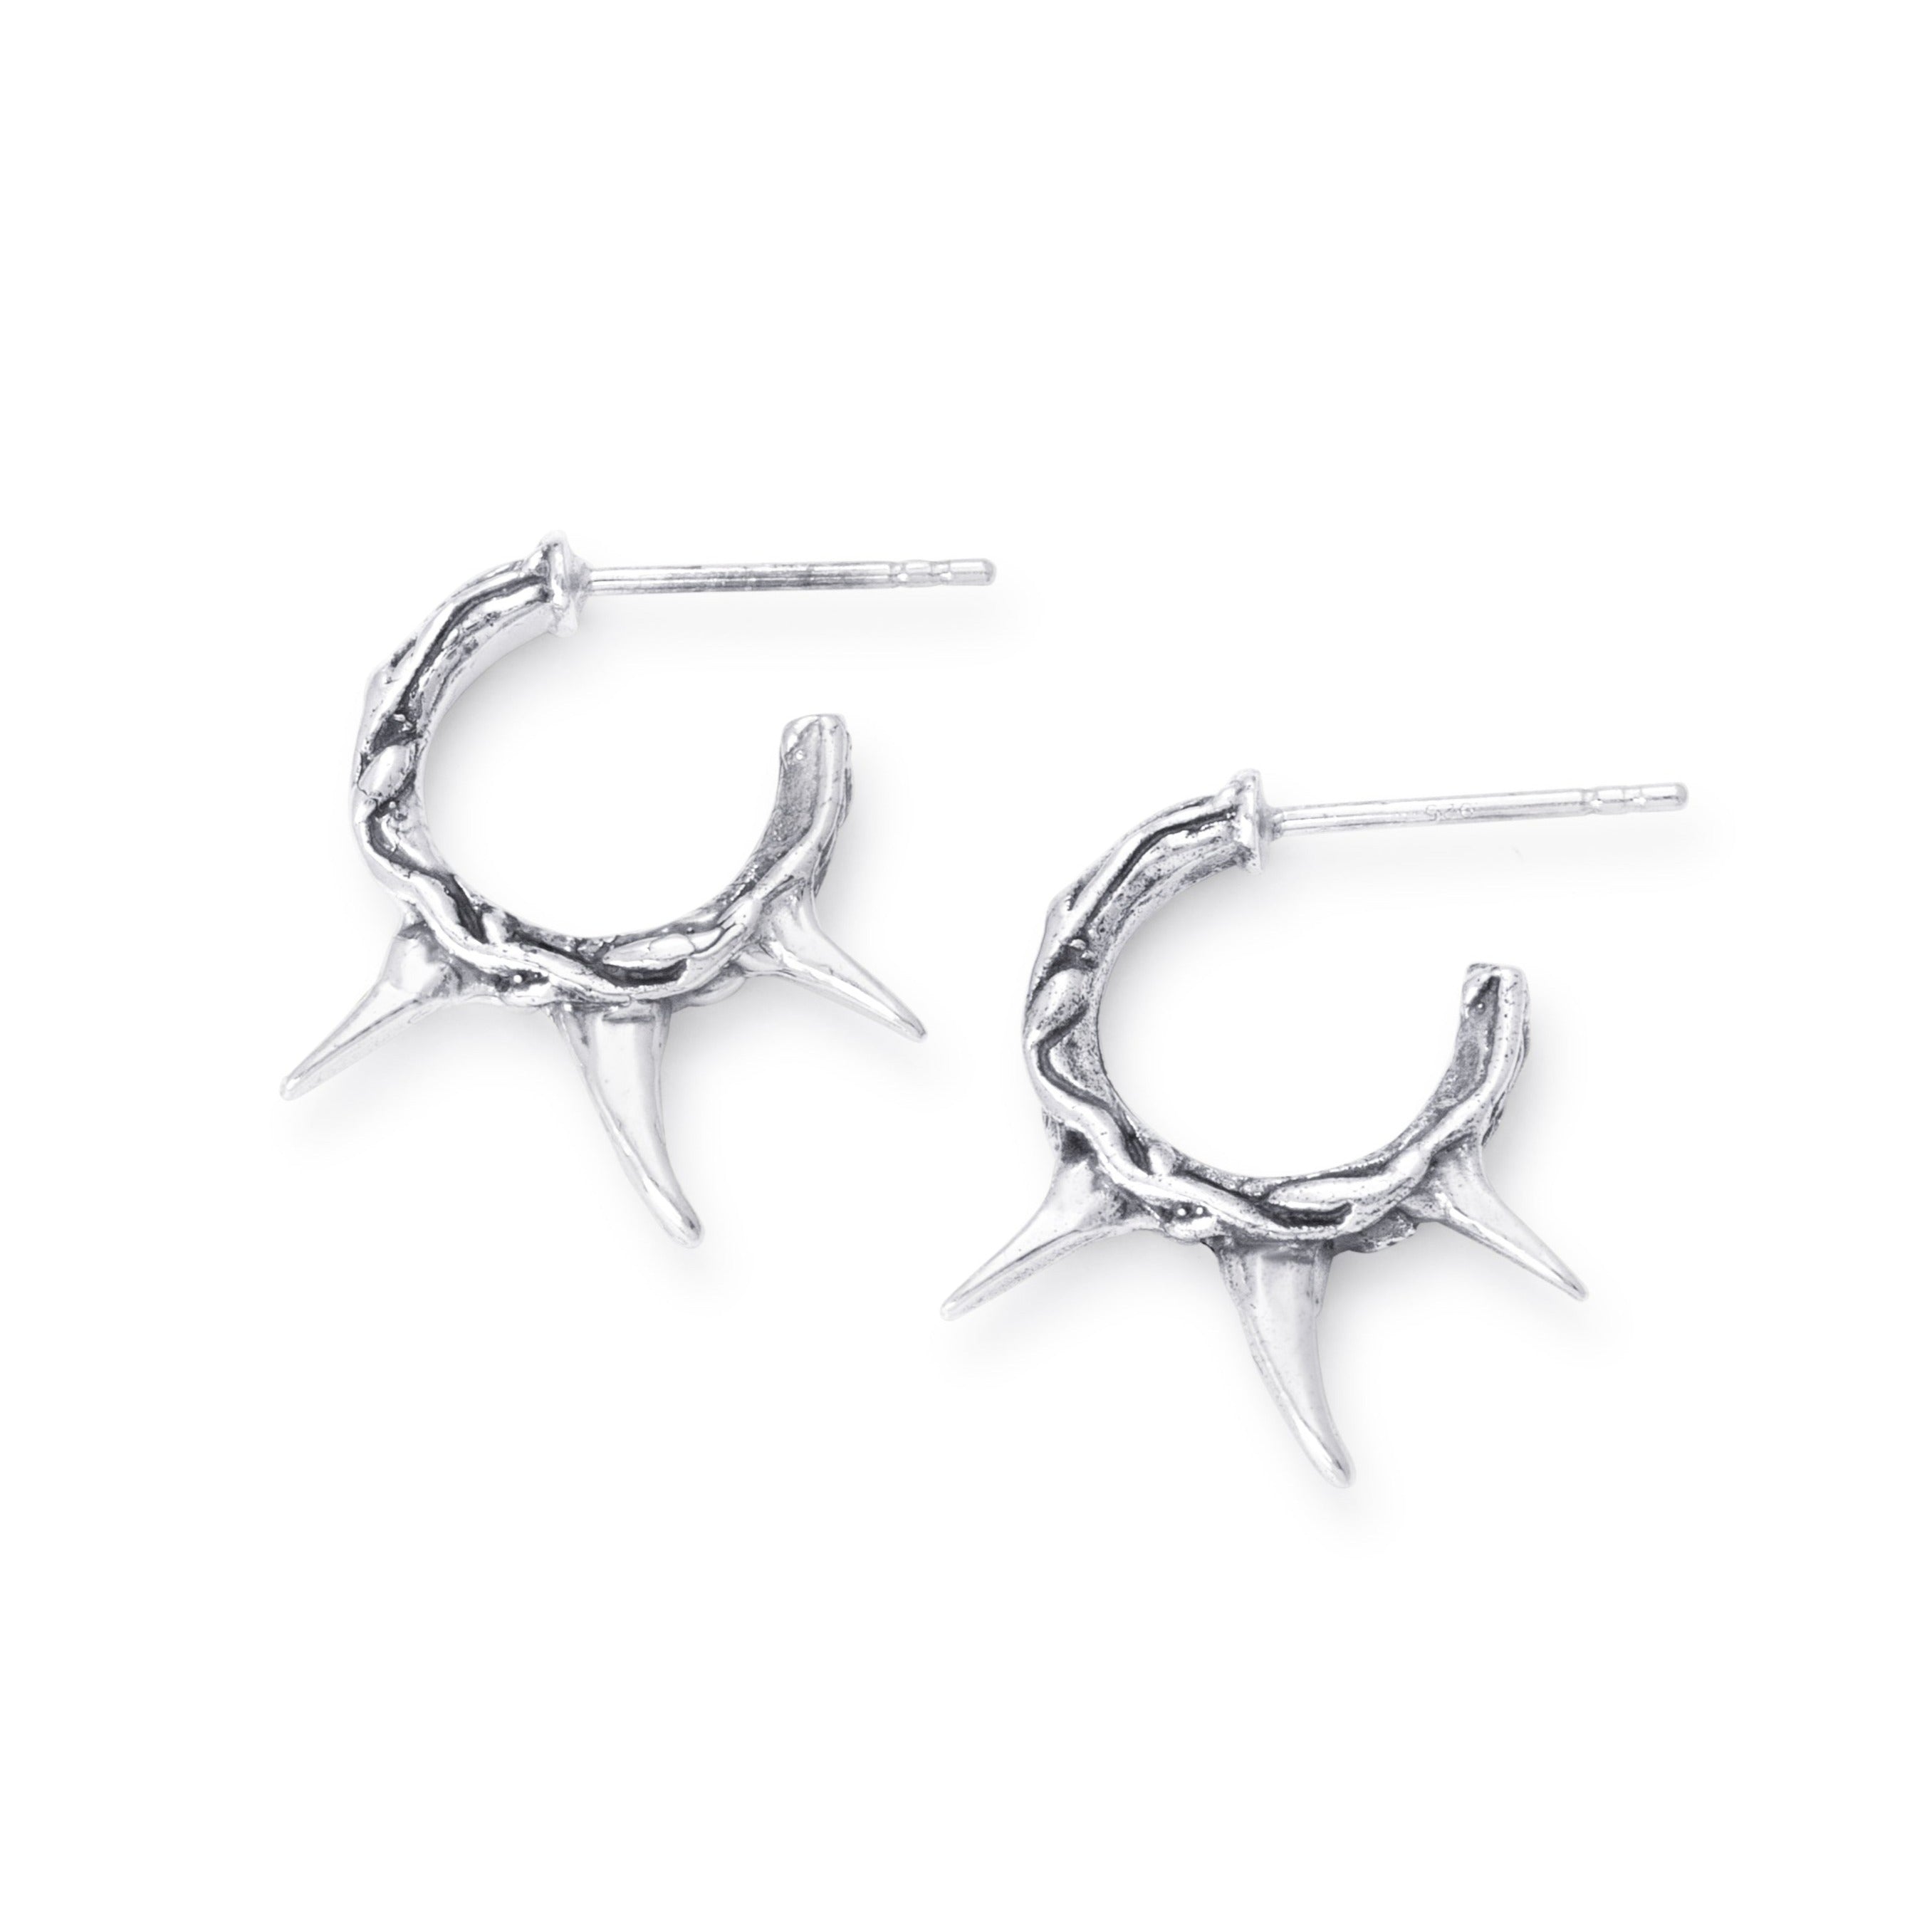 Solid Sterling Silver hoop studs with a vine texture and three thorns.